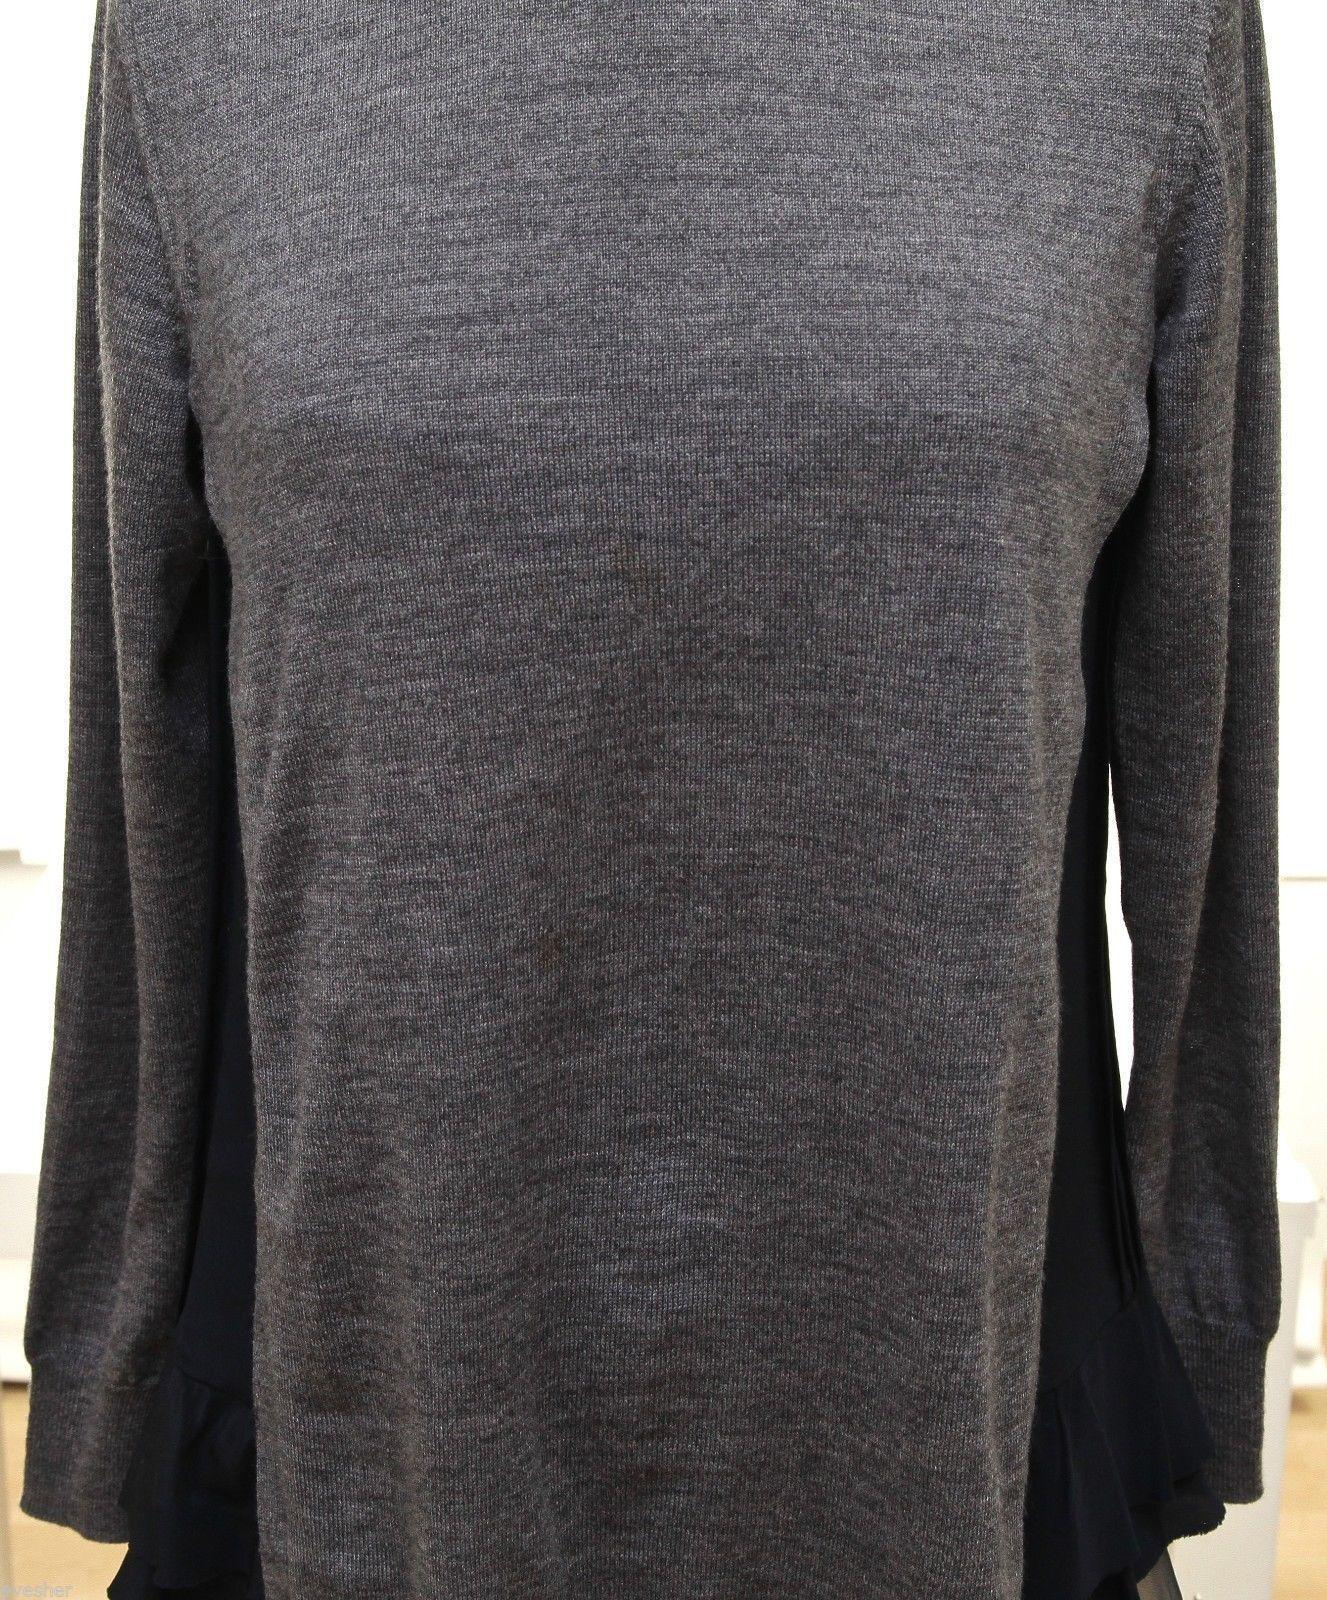 MIU MIU Top Sweater Knit Tunic Wool Grey Navy Silk Long Sleeve Sz 36 In Good Condition For Sale In Hollywood, FL